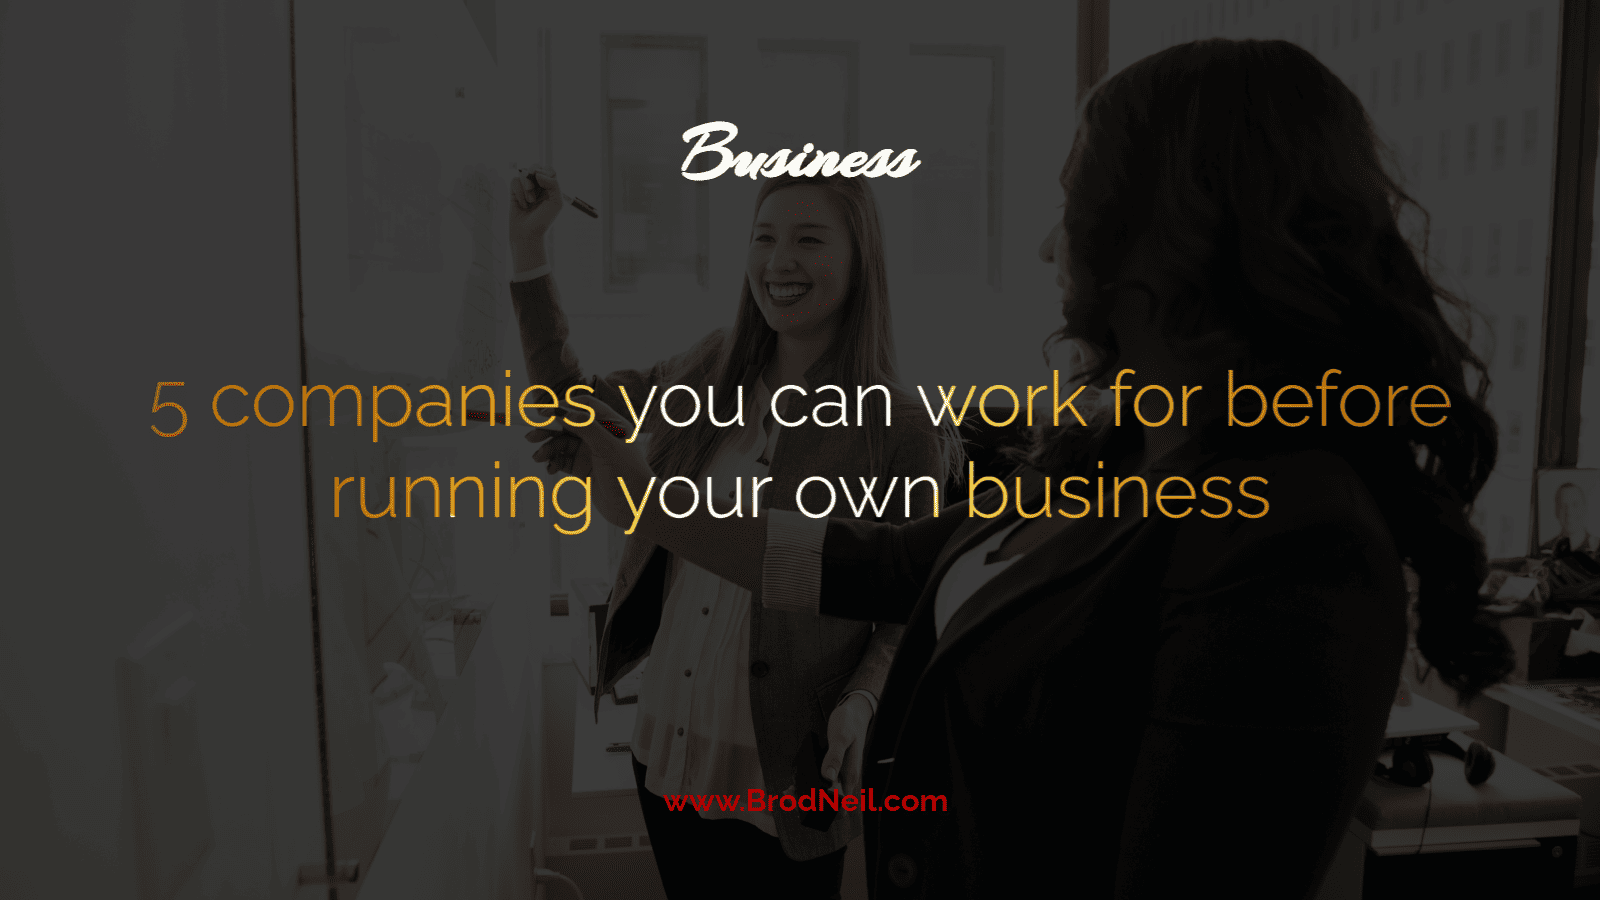 5 companies you can work for before running your own business